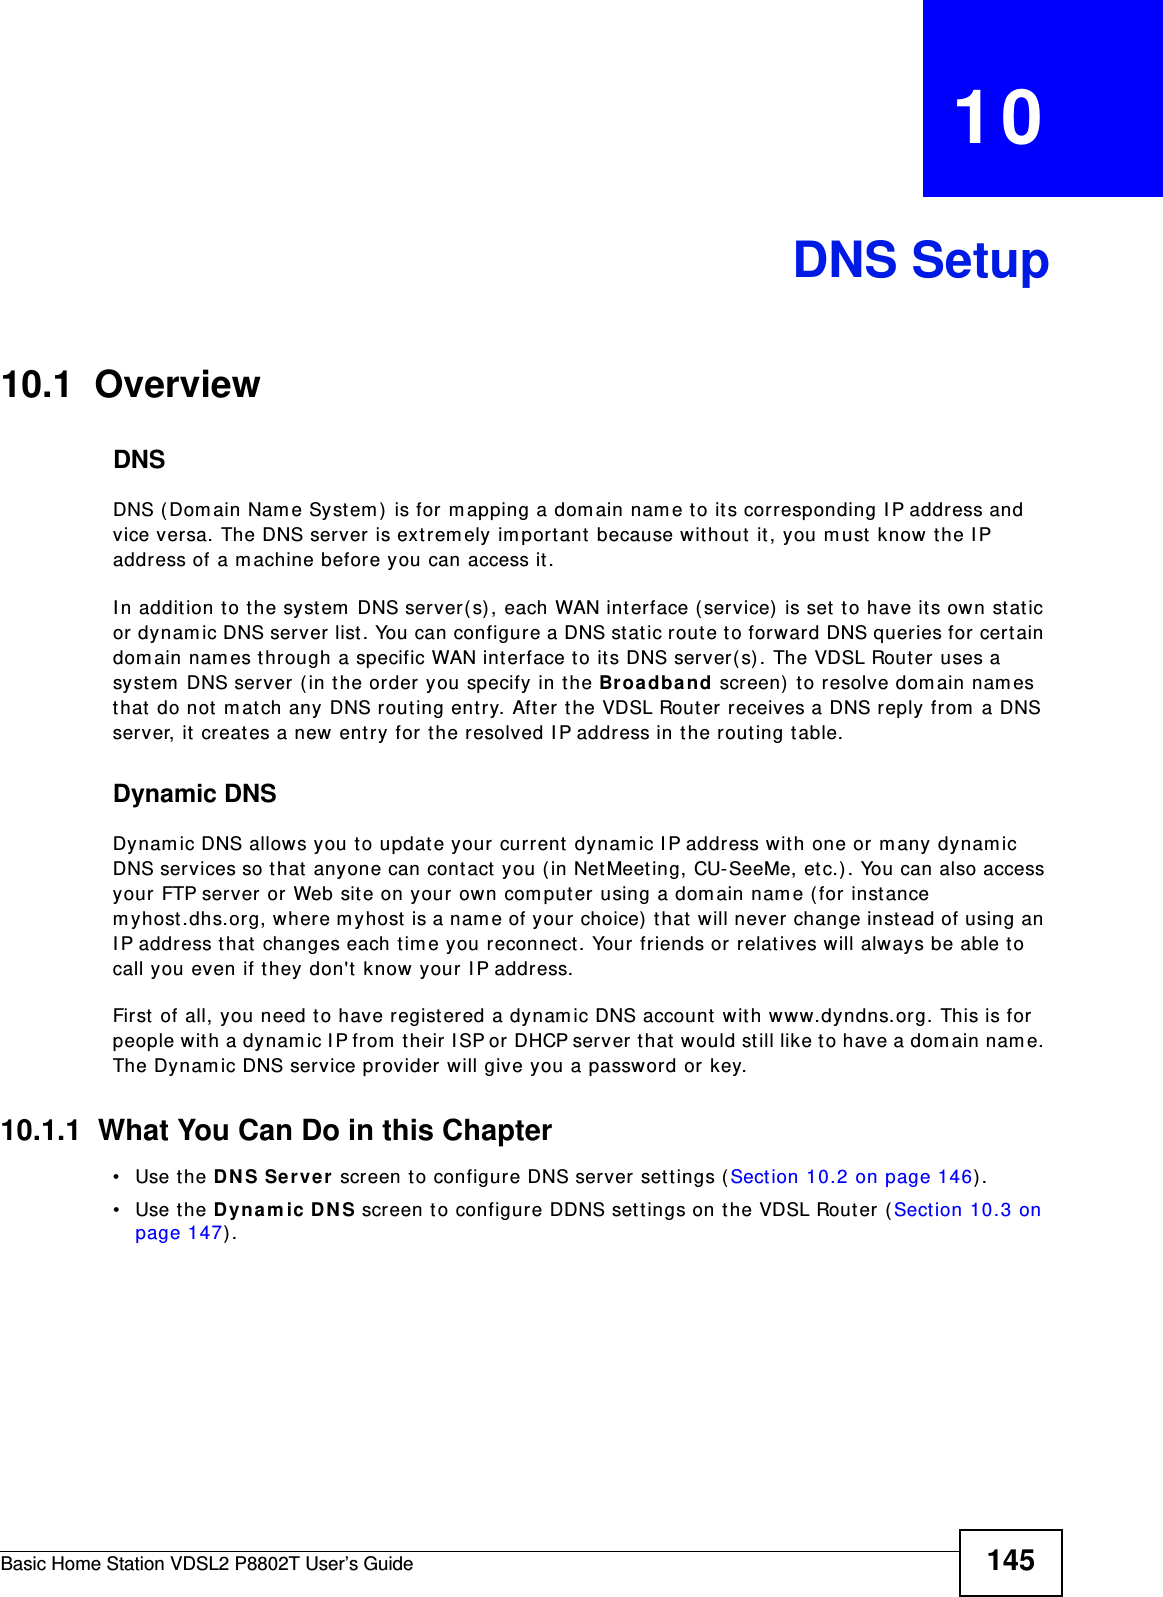 Basic Home Station VDSL2 P8802T User’s Guide 145CHAPTER   10DNS Setup10.1  Overview DNSDNS ( Dom ain Nam e Syst em ) is for m apping a dom ain nam e t o its corresponding I P address and vice ver sa. The DNS server is extrem ely im port ant  because w it hout it, you m ust  know t he I P address of a m achine before you can access it . I n addit ion to the syst em  DNS server( s) , each WAN int erface (service)  is set  to have its own st at ic or dynam ic DNS server list. You can configure a DNS st atic rout e t o forward DNS queries for certain dom ain nam es t hrough a specific WAN interface to it s DNS server( s) . The VDSL Router uses a syst em  DNS ser ver (in the order you specify in the Br oadband scr een)  t o resolve dom ain nam es that  do not  m at ch any DNS rout ing entry. Aft er the VDSL Router receives a DNS reply from a DNS server, it  creat es a new ent ry for t he resolved I P address in t he routing table.Dynamic DNSDynam ic DNS allows you to update your current dynam ic I P address with one or m any dynam ic DNS services so that anyone can cont act  you ( in Net Meet ing, CU-SeeMe, etc.) . You can also access your FTP server or Web site on your own com puter using a domain nam e ( for inst ance m yhost .dhs.org, where m yhost  is a nam e of your choice)  t hat  will never change instead of using an I P address t hat  changes each tim e you reconnect . Your friends or relatives will always be able to call you even if t hey don&apos;t know your I P address.First  of all, you need t o have regist ered a dynam ic DNS account  with www.dyndns.org. This is for people wit h a dynam ic I P from  t heir I SP or DHCP server that would st ill like to have a dom ain nam e. The Dynam ic DNS service provider will give you a password or key. 10.1.1  What You Can Do in this Chapter• Use the D NS Ser ve r screen t o configure DNS ser ver sett ings ( Sect ion 10.2 on page 146) .• Use the D ynam ic DNS screen t o configure DDNS sett ings on the VDSL Router (Sect ion 10.3 on page 147) .